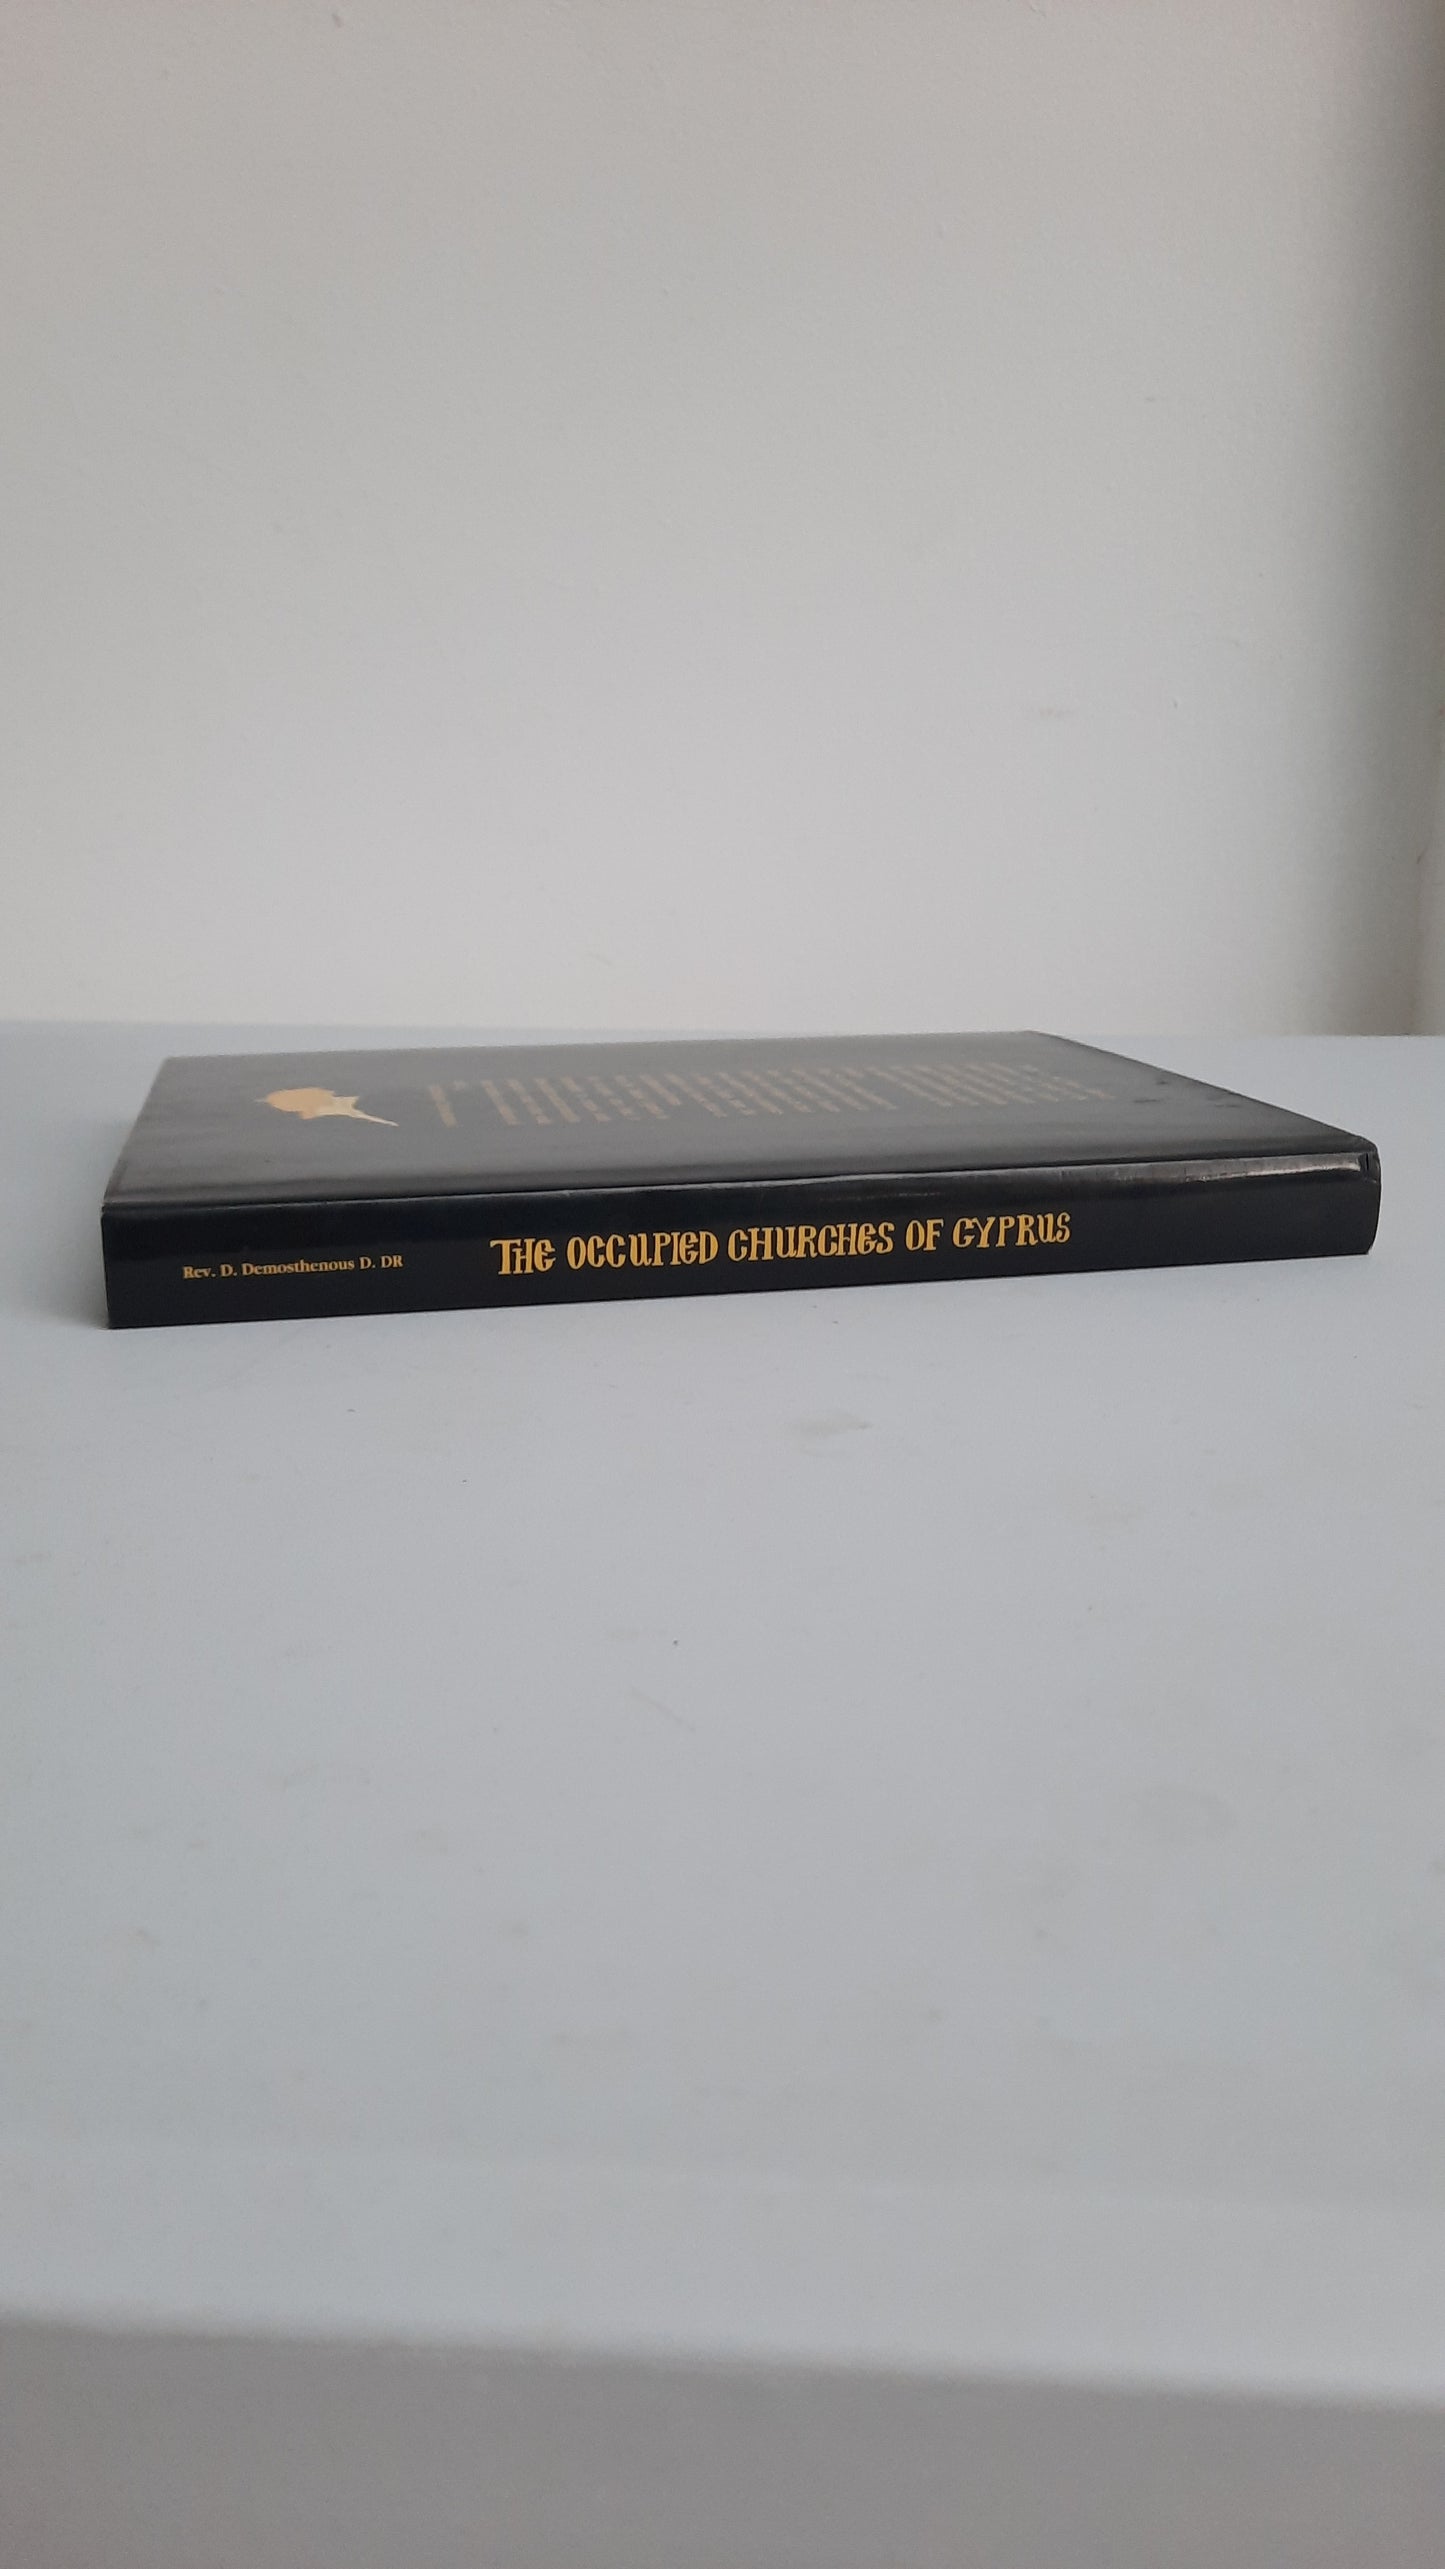 "The Occupied Churches of Cyprus" 2000 by Rev. D. Demosthenous